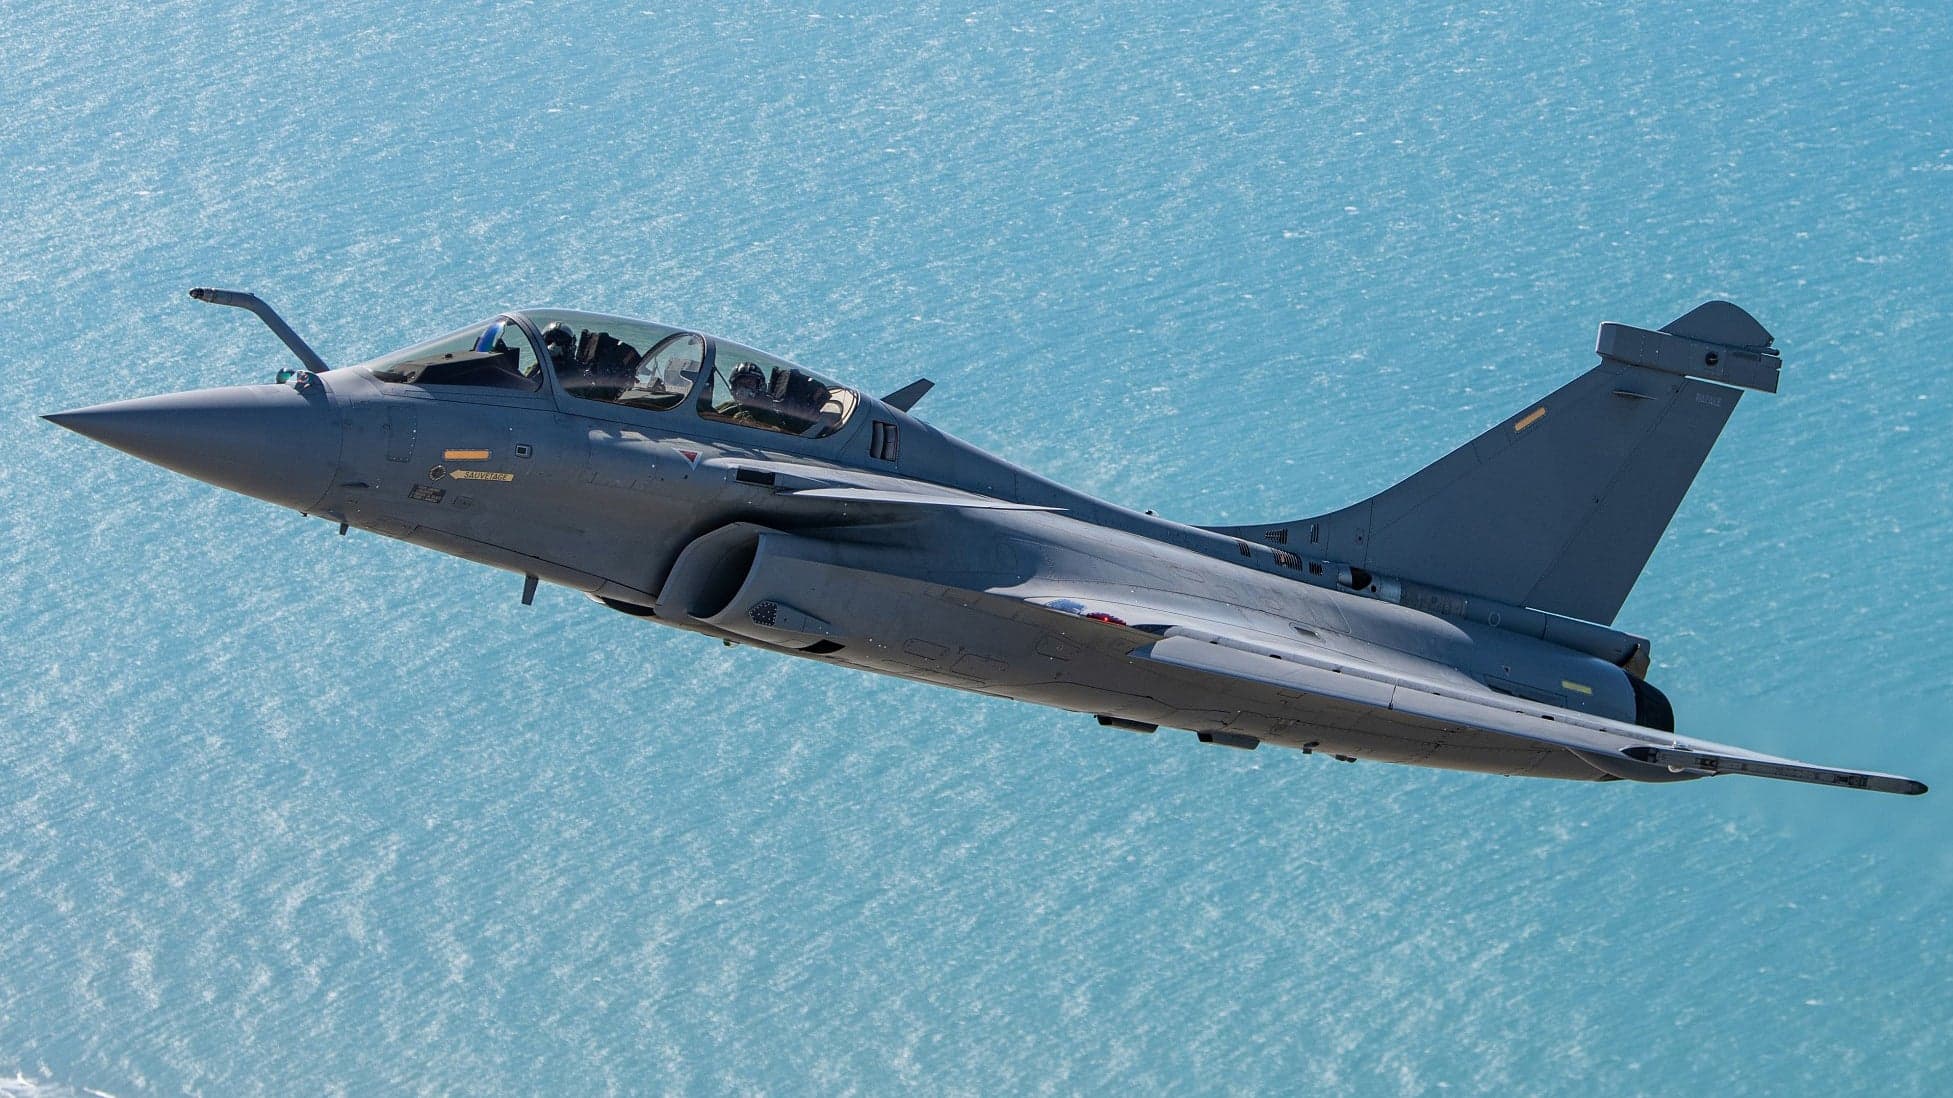 Indonesia Finally Chooses The French Rafale Fighter To Modernize Its Air Force (Updated)